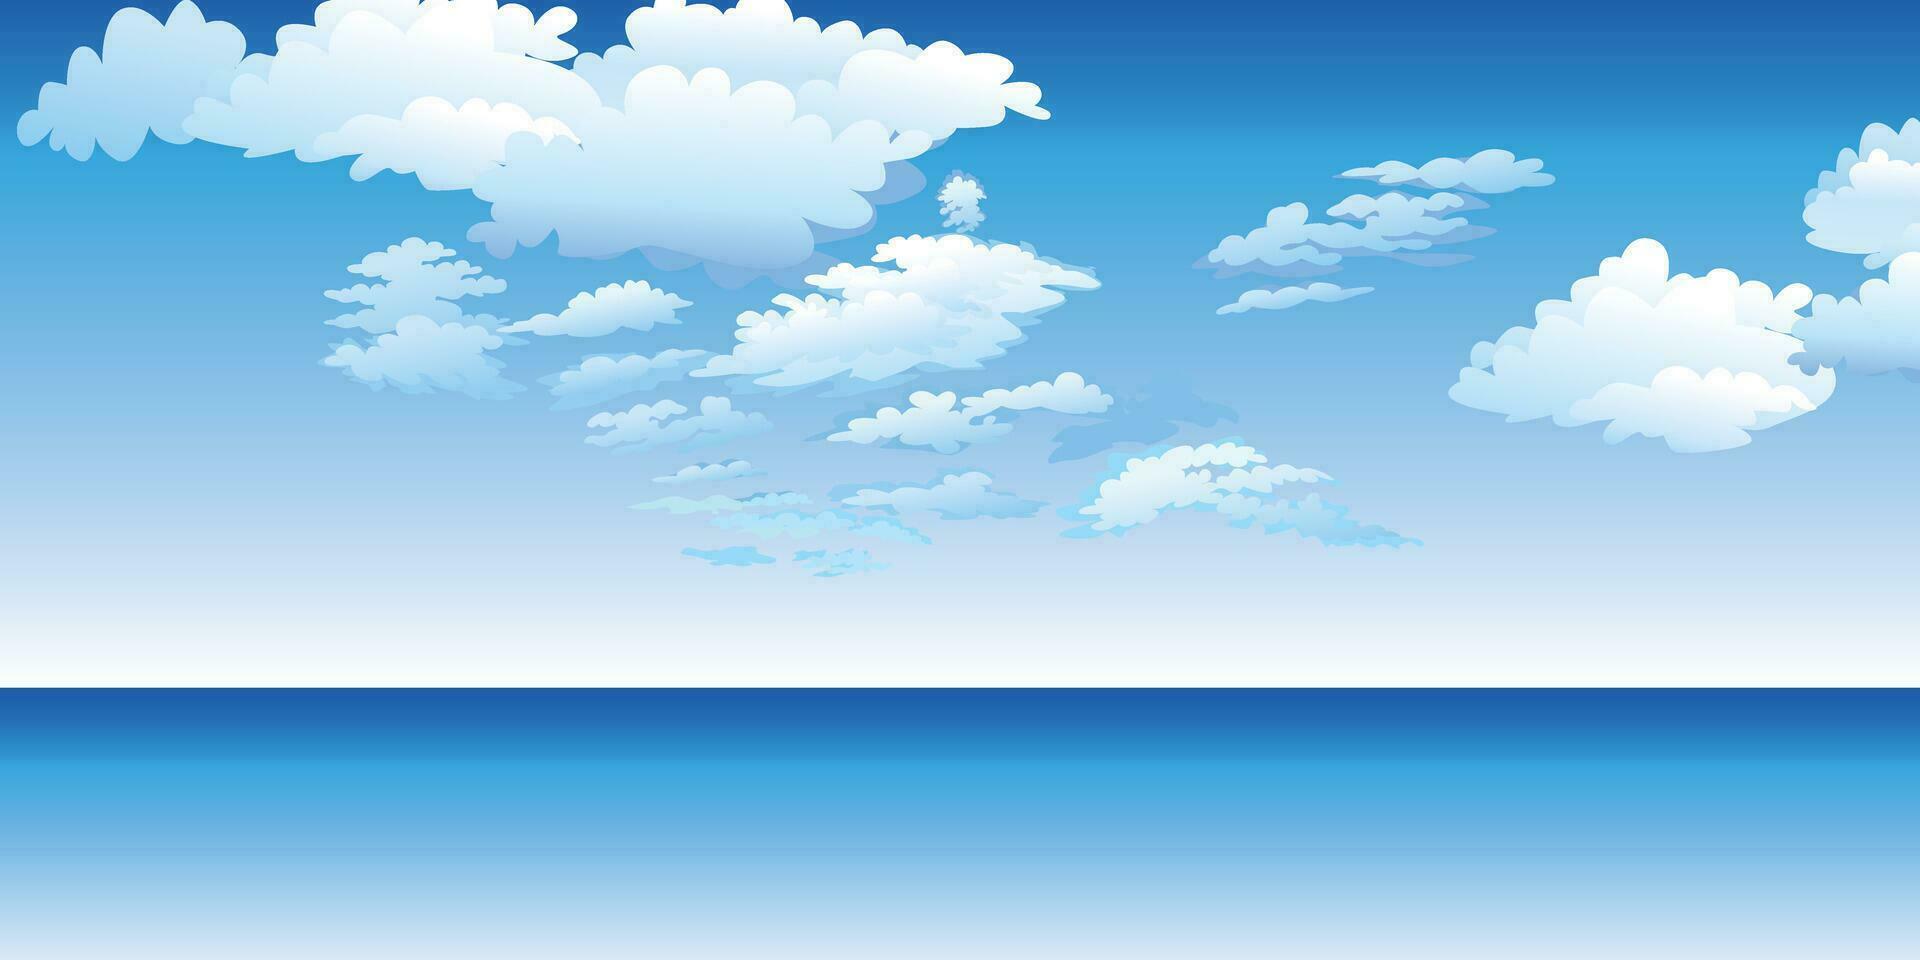 day landscape sky clouds. Clean style anime. Background design vector